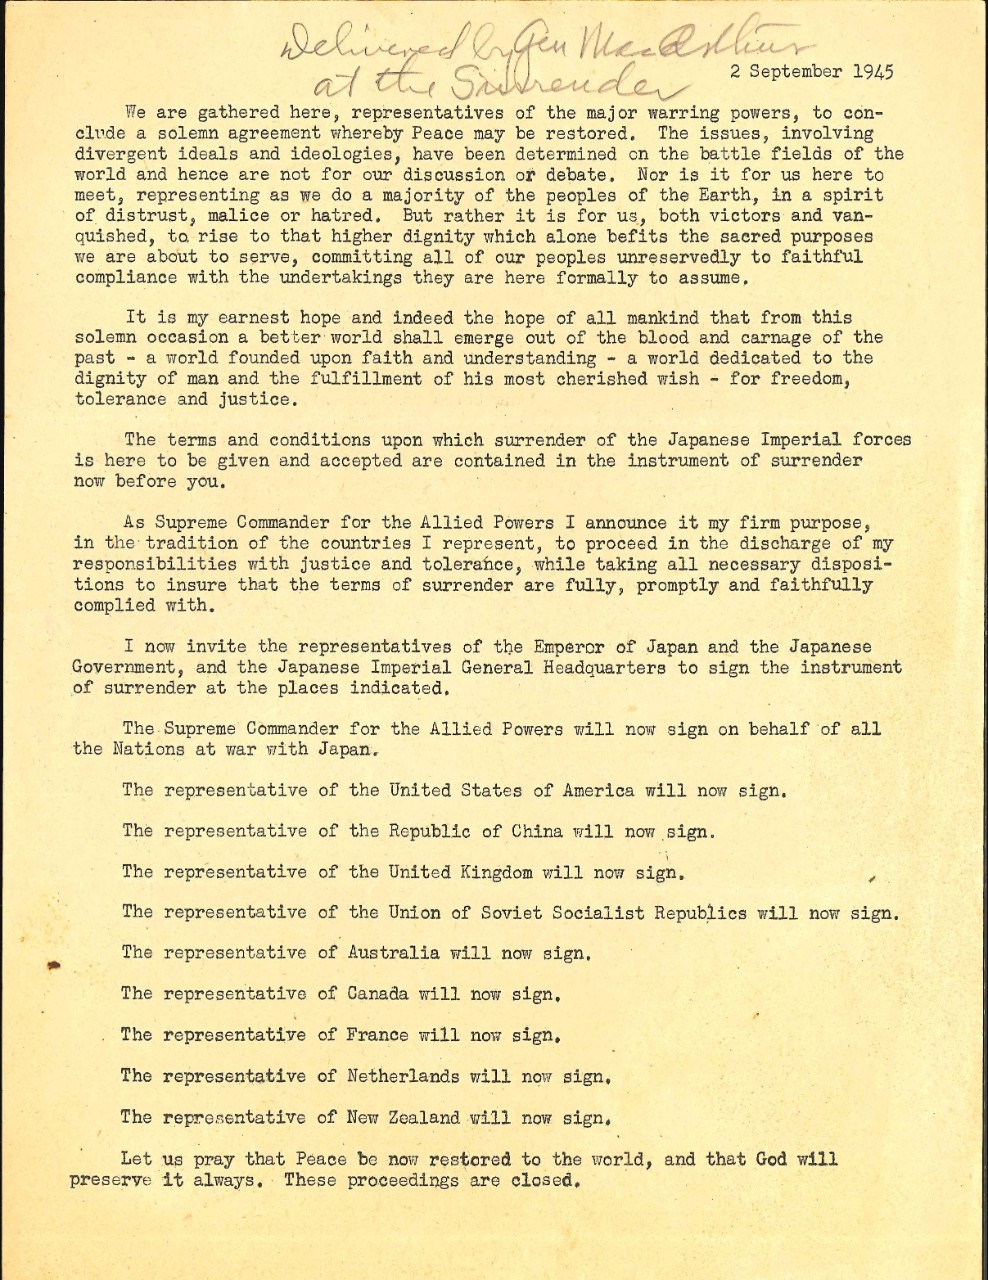 Speech delivered by General MacArthur at the surrender ceremony in Tokyo Bay, Sep. 2, 1945